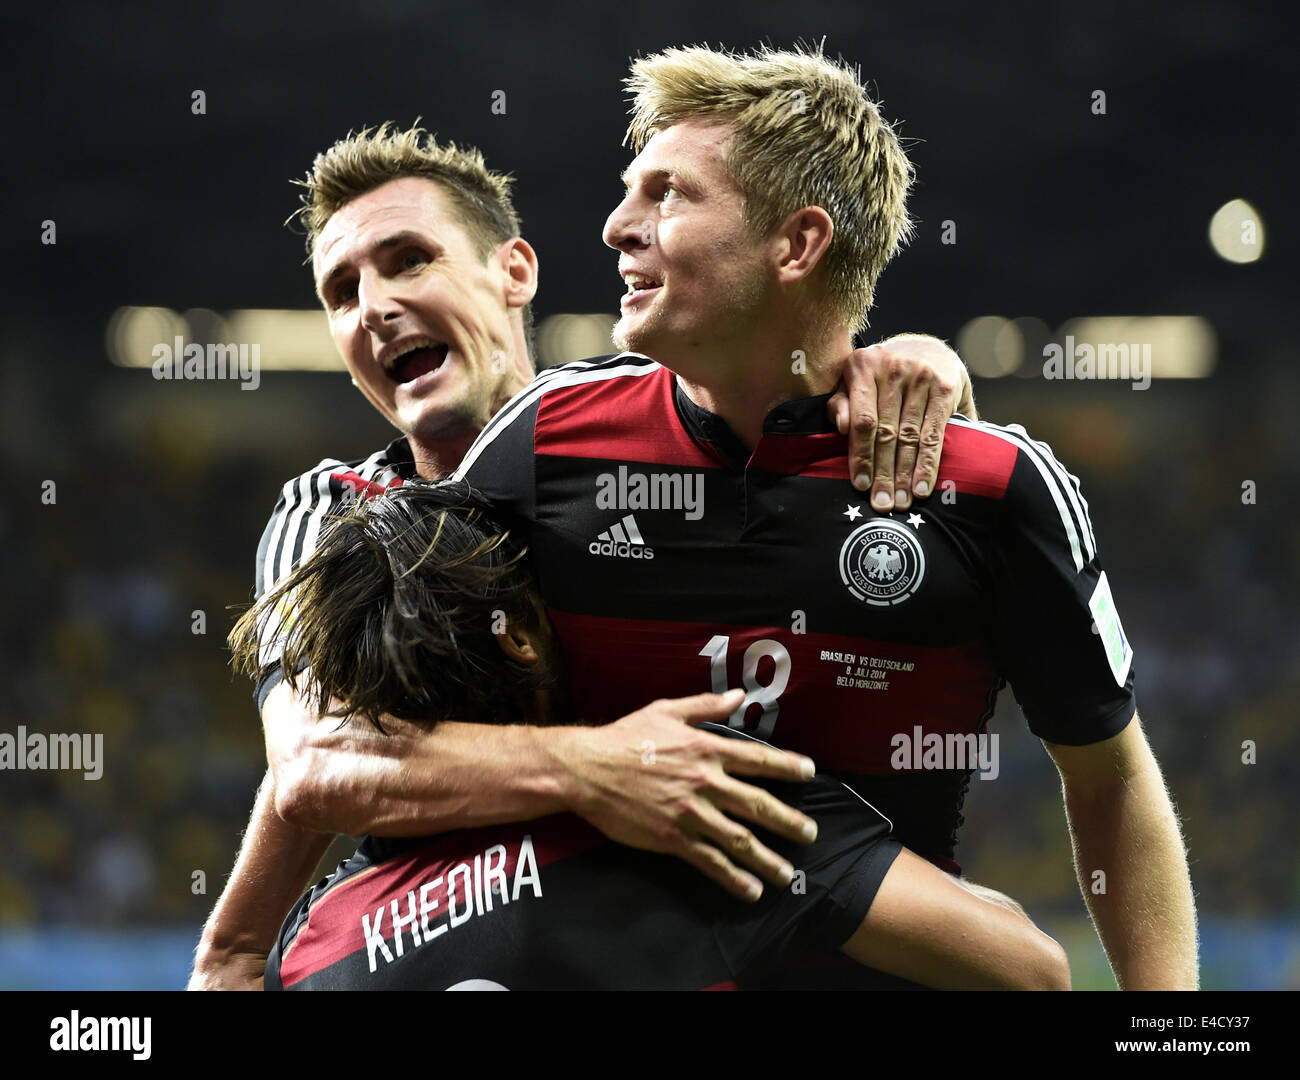 Belo Horizonte, Brazil. 8th July, 2014. Germany's Miroslav Klose (L, back) and Sami Khedira (L, front) with Toni Kroos (R) for Toni's second goal during a semifinal match between Brazil and Germany of 2014 FIFA World Cup at the Estadio Mineirao Stadium in Belo Horizonte, Brazil, on July 8, 2014. Credit:  Qi Heng/Xinhua/Alamy Live News Stock Photo